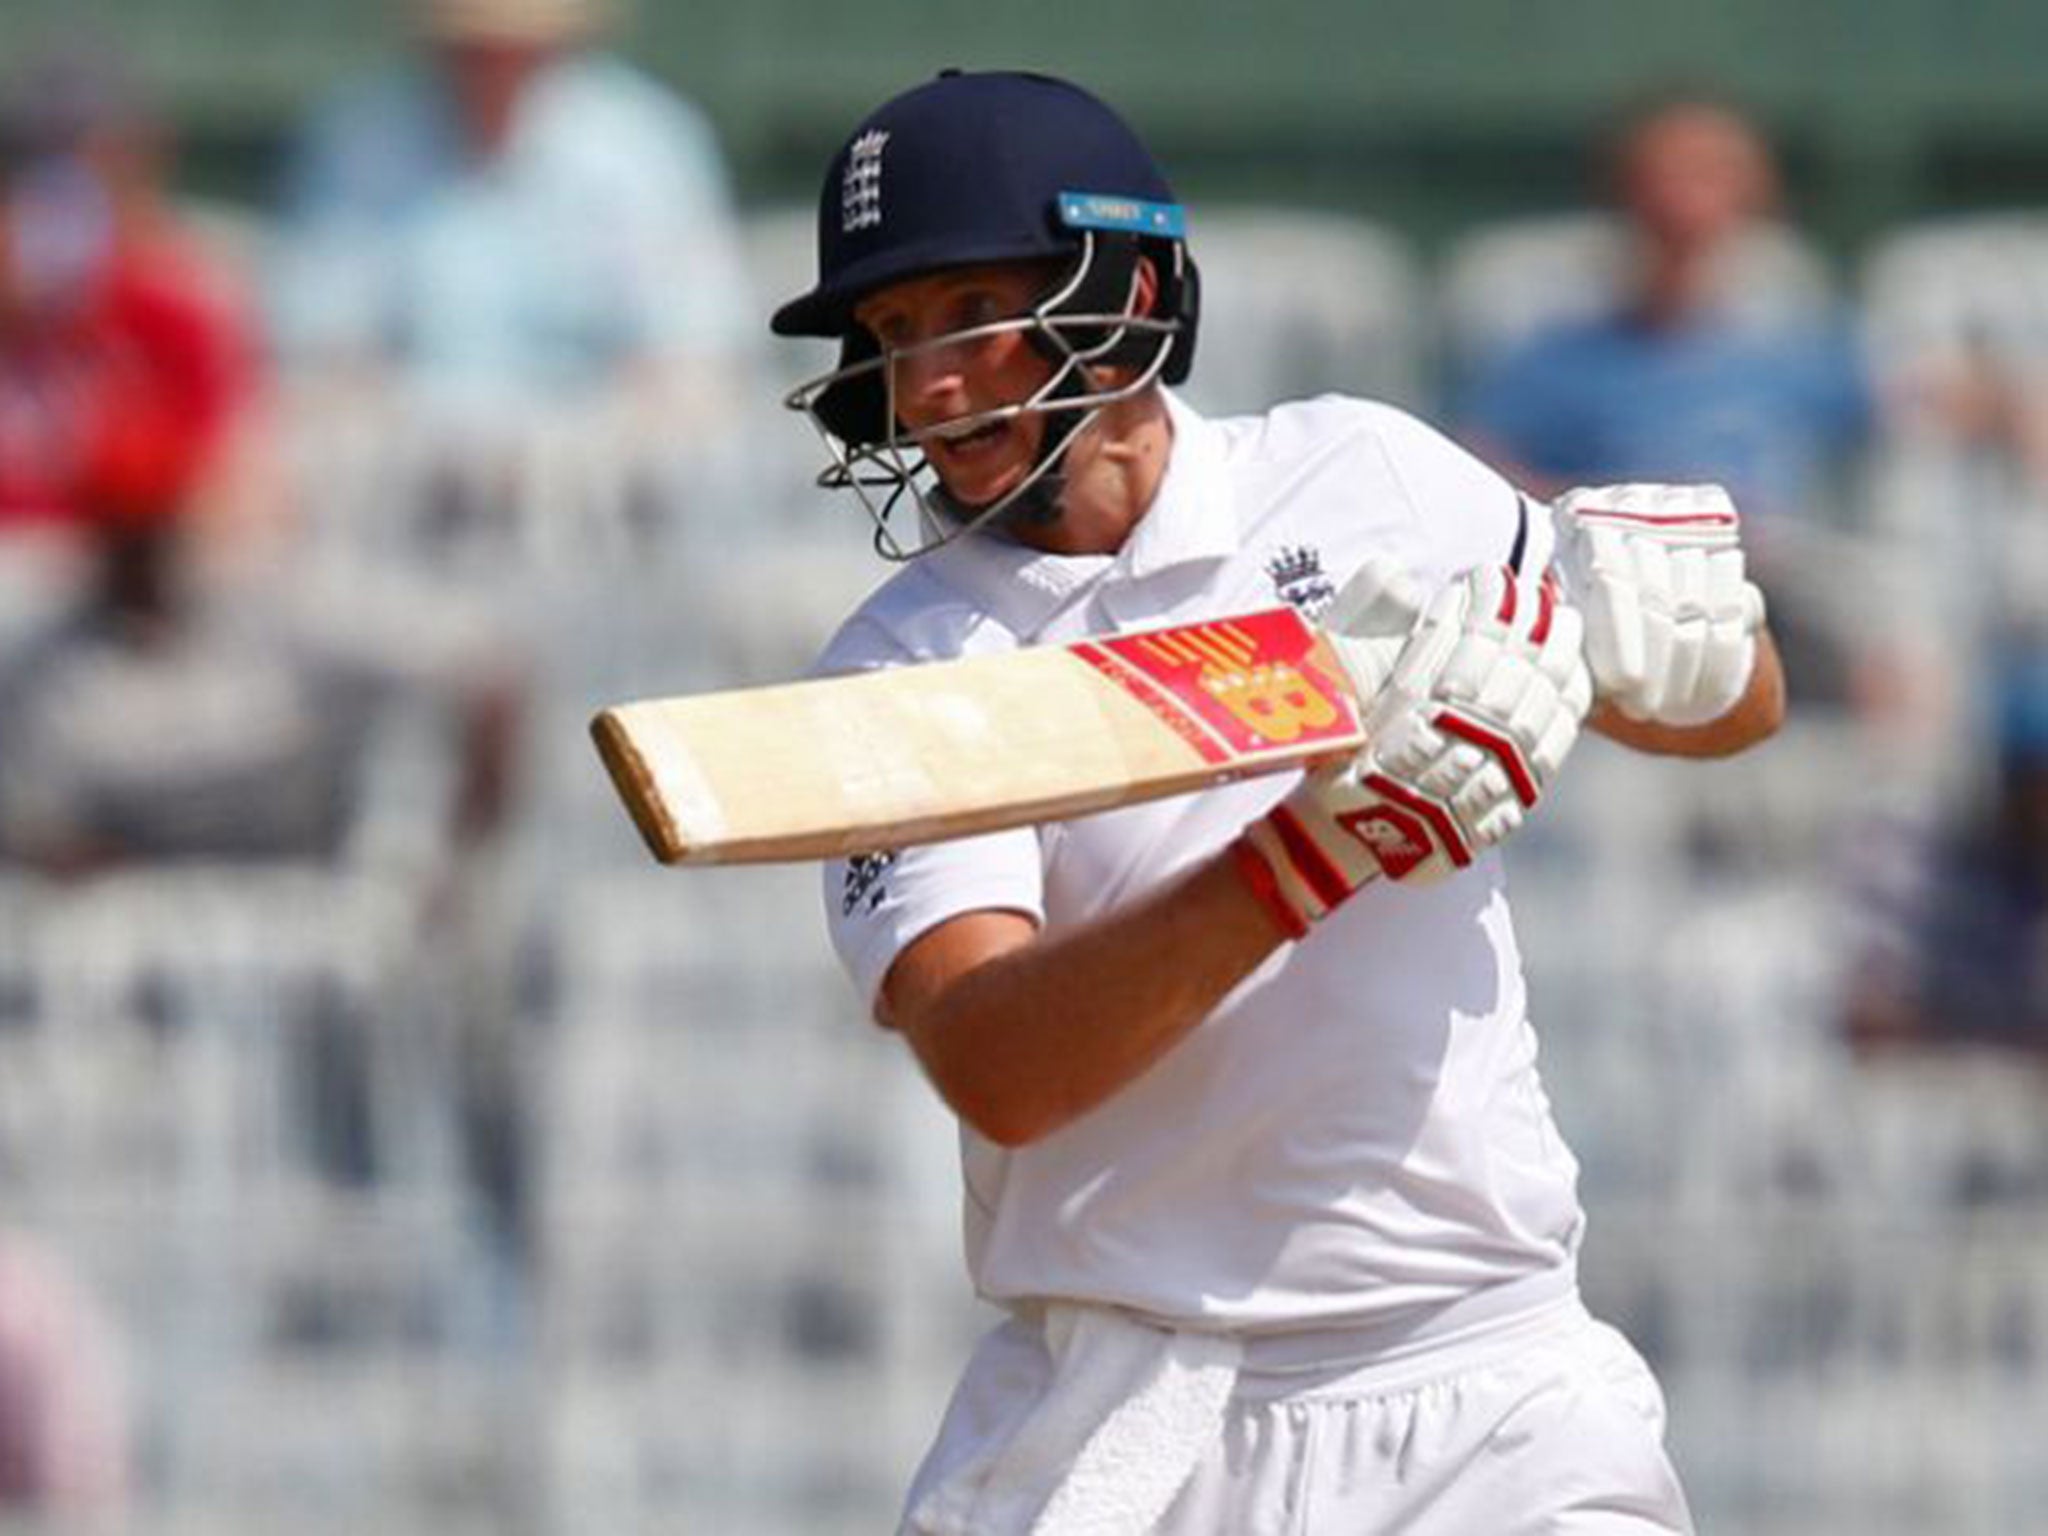 Joe Root steered England away from a poor start to reach 68-2 at lunch